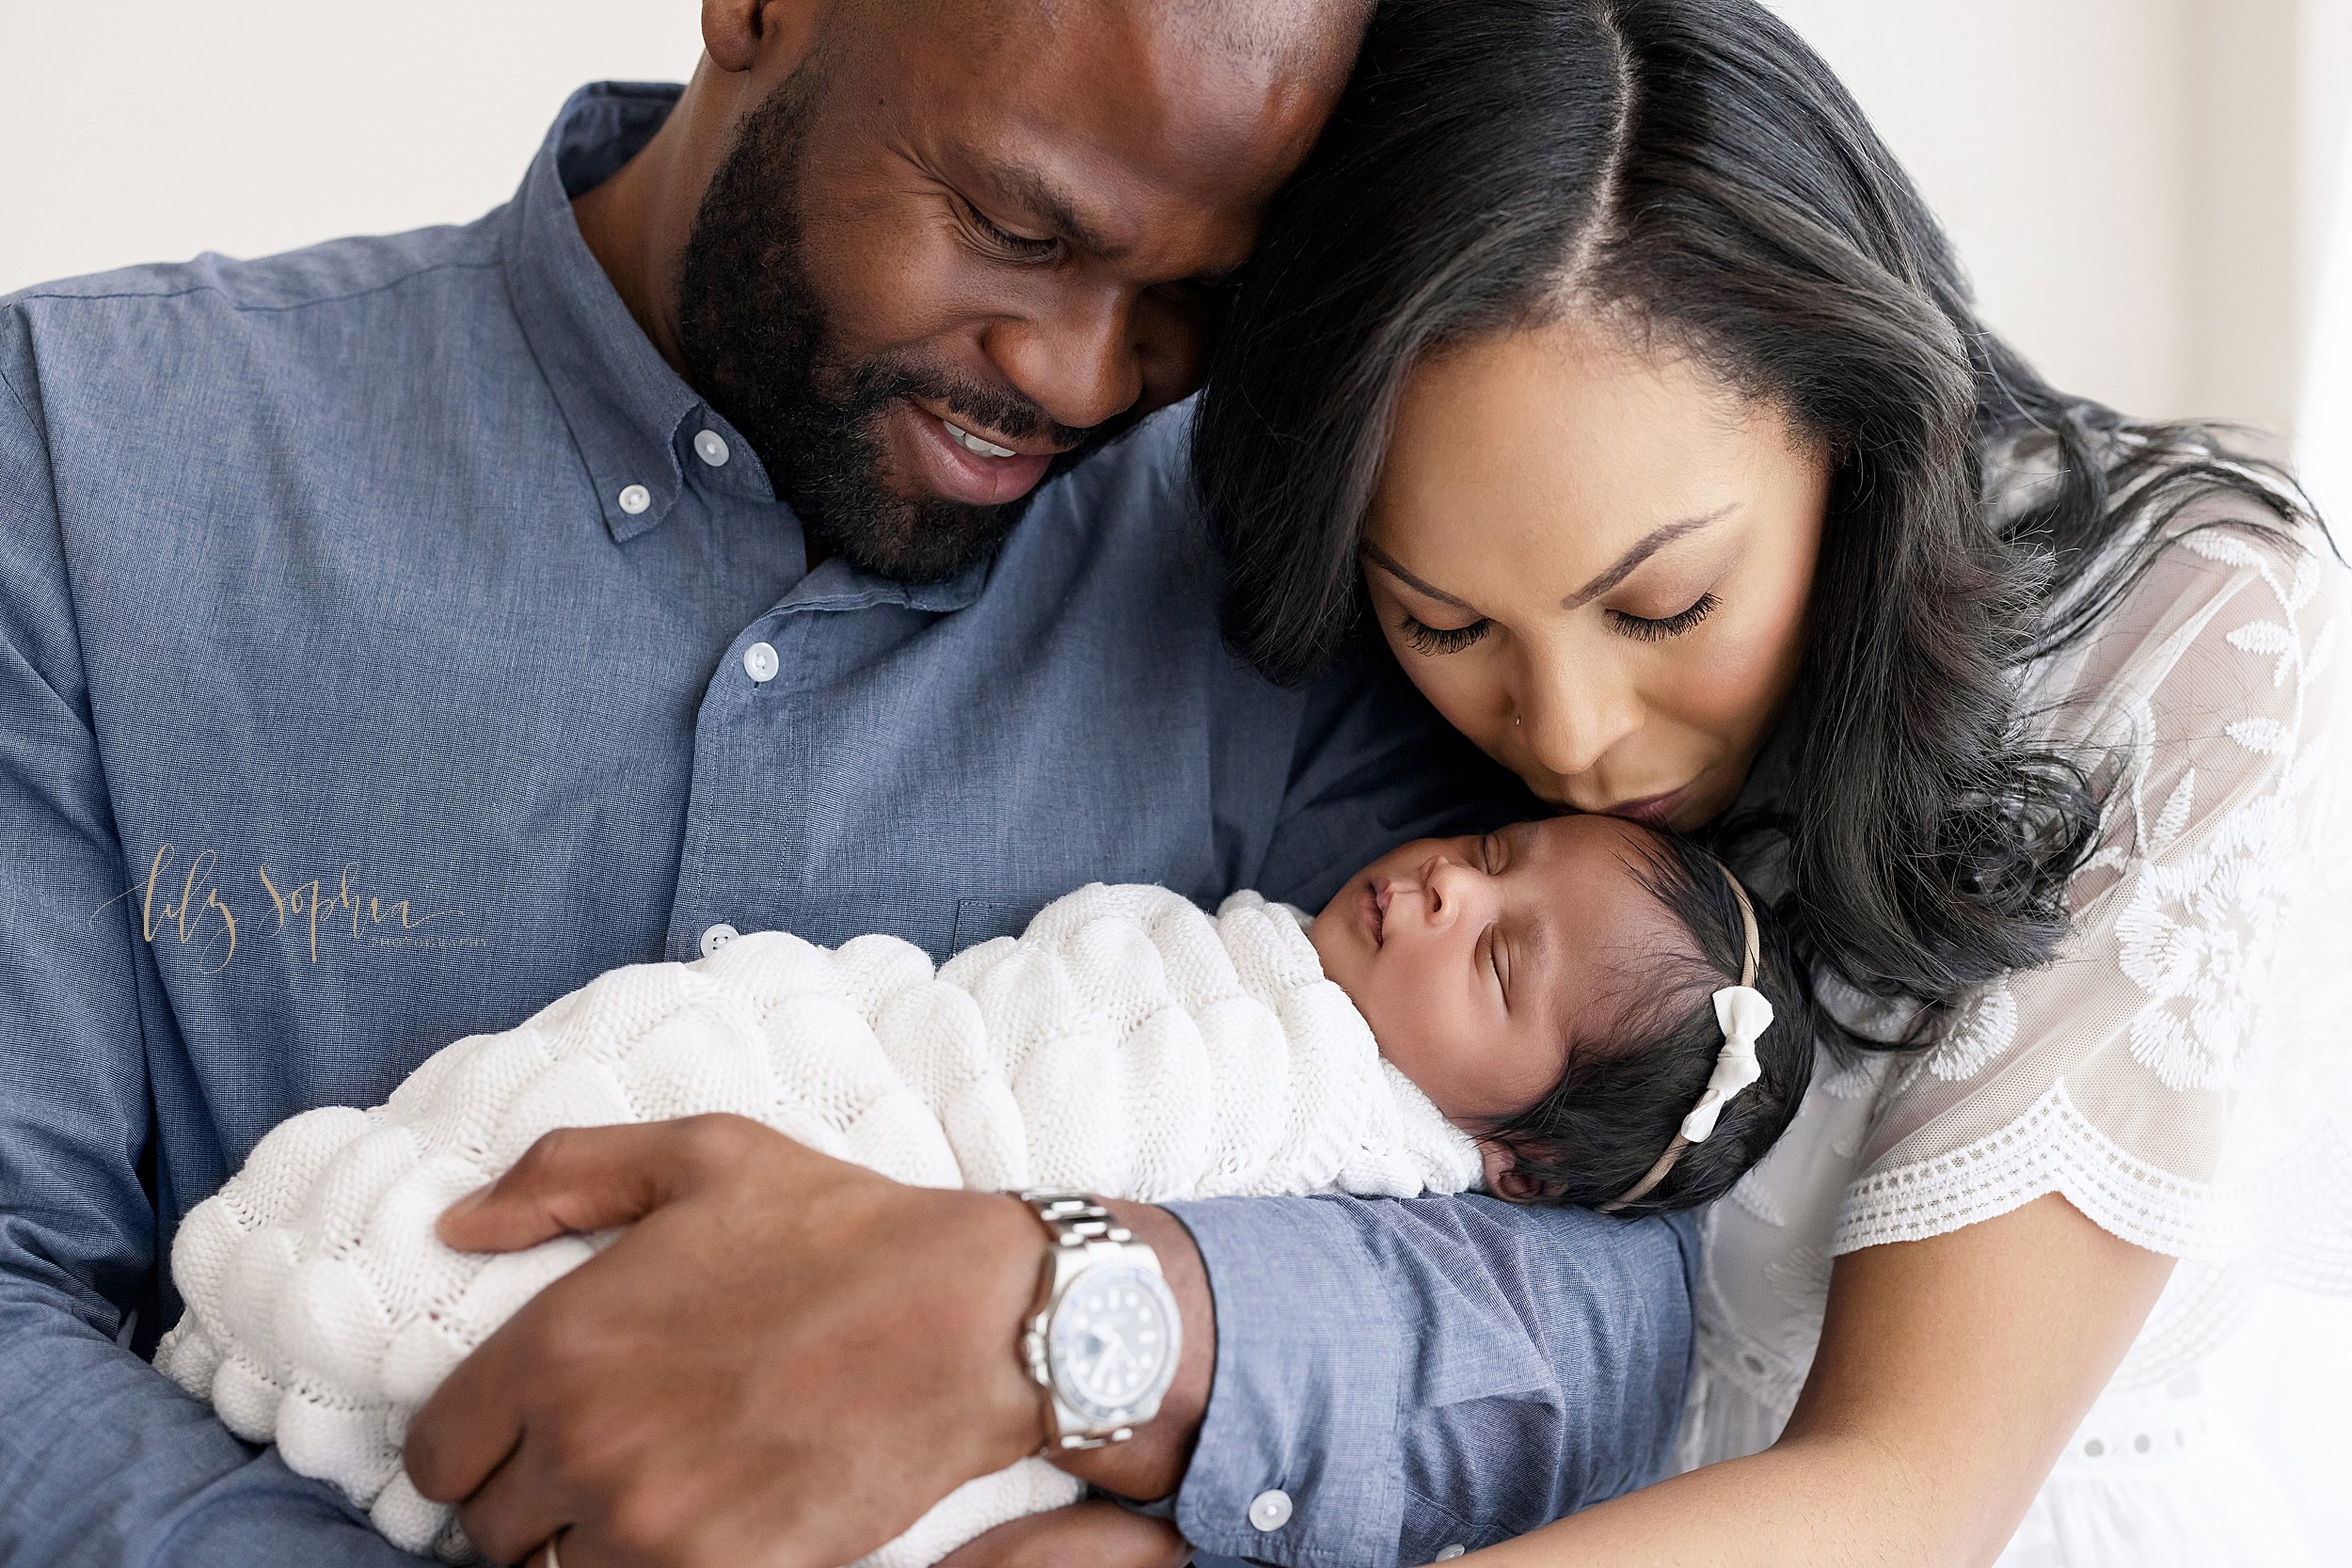  Newborn photo shoot of an African-American father holding his peacefully sleeping daughter in his arms in front of his chest while mom bends over and kisses her daughter’s forehead taken in natural light in a studio near Ansley Park near Atlanta, Ge